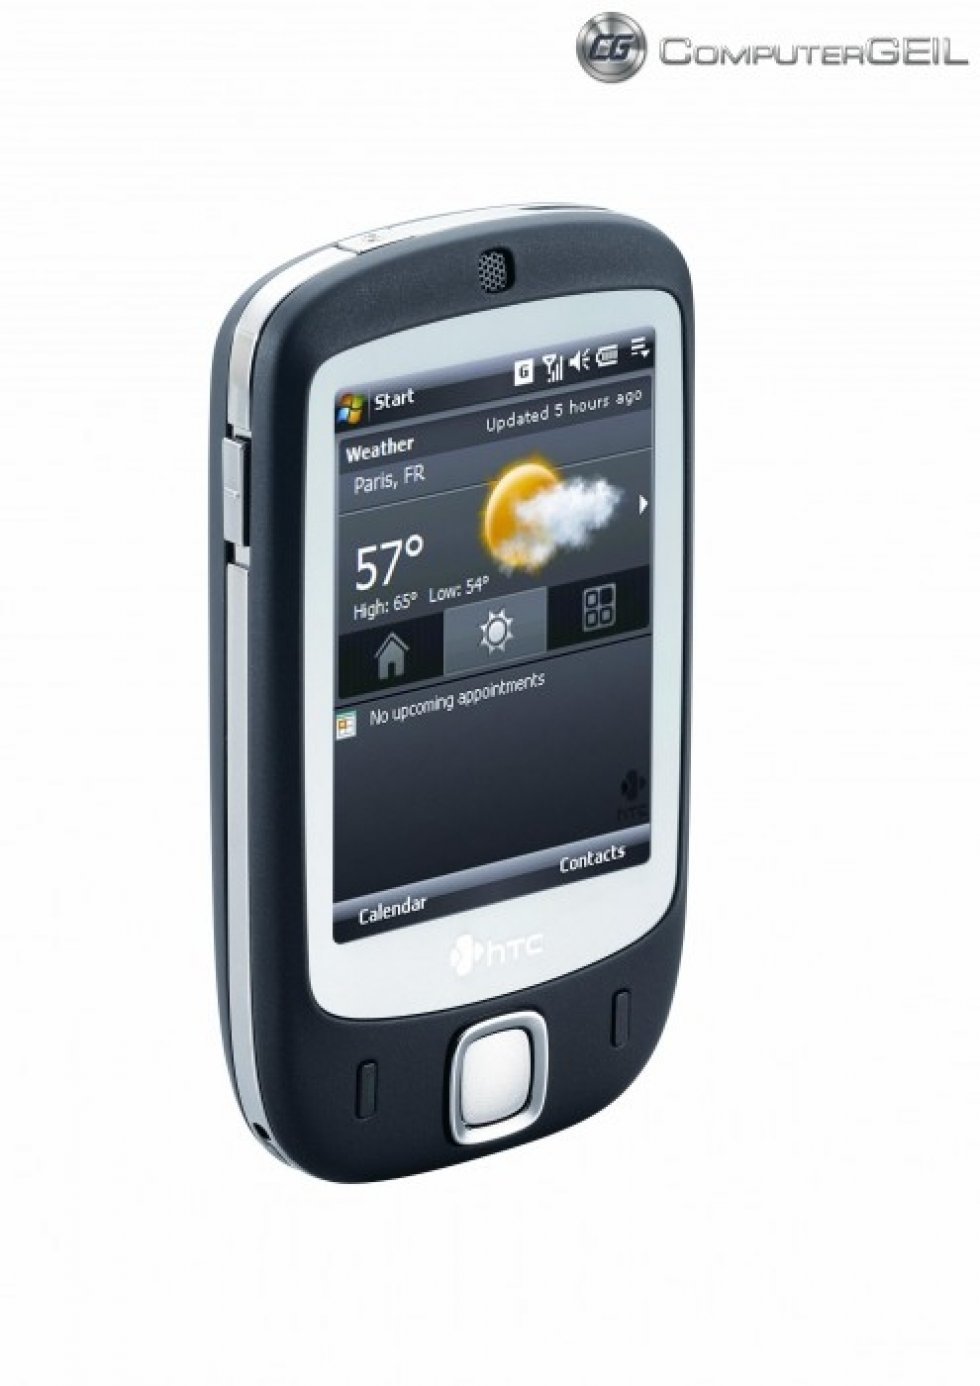 HTC Touch touchscreen-oplevelse